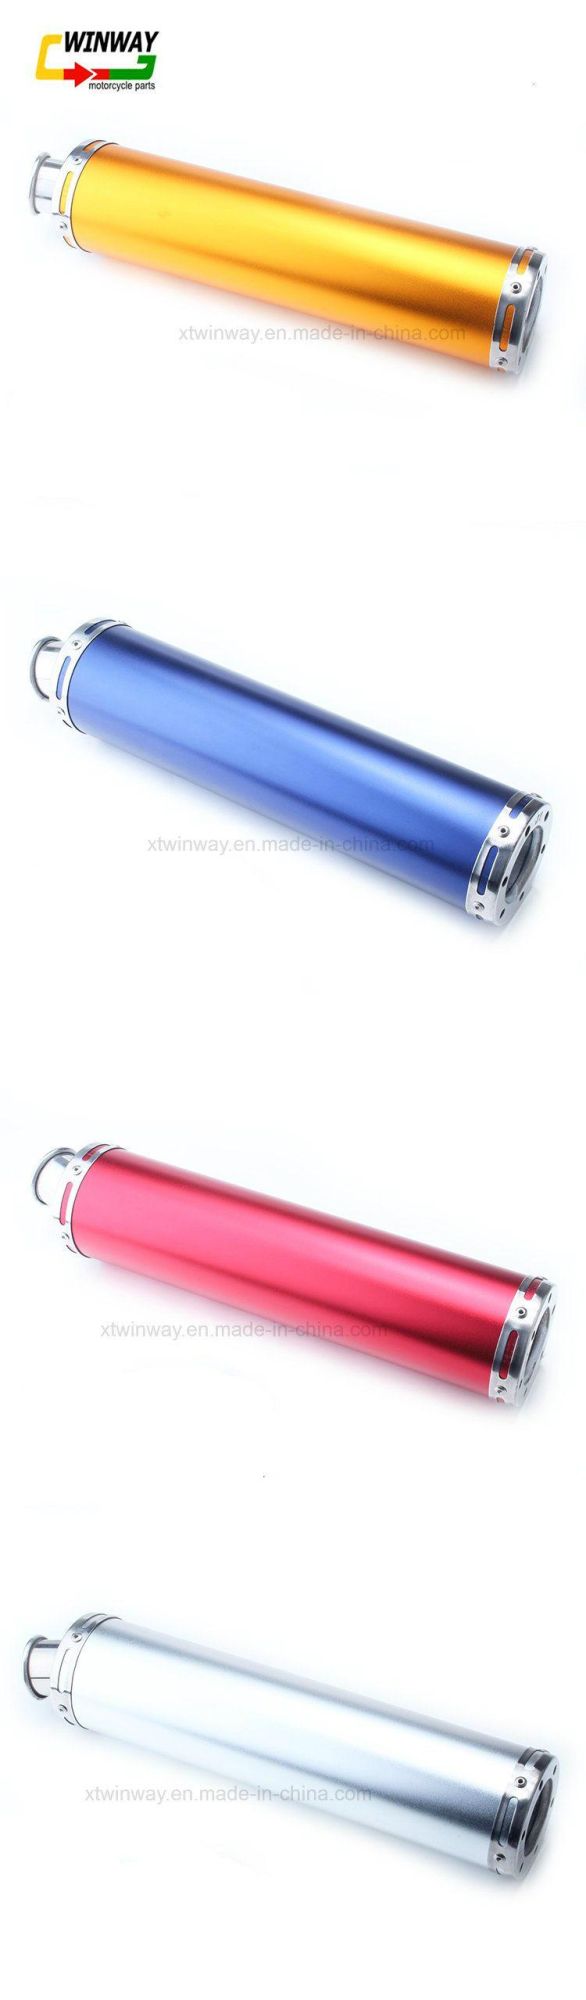 Motorcycle Parts Colorful Exhaust Pipe Muffler for 125